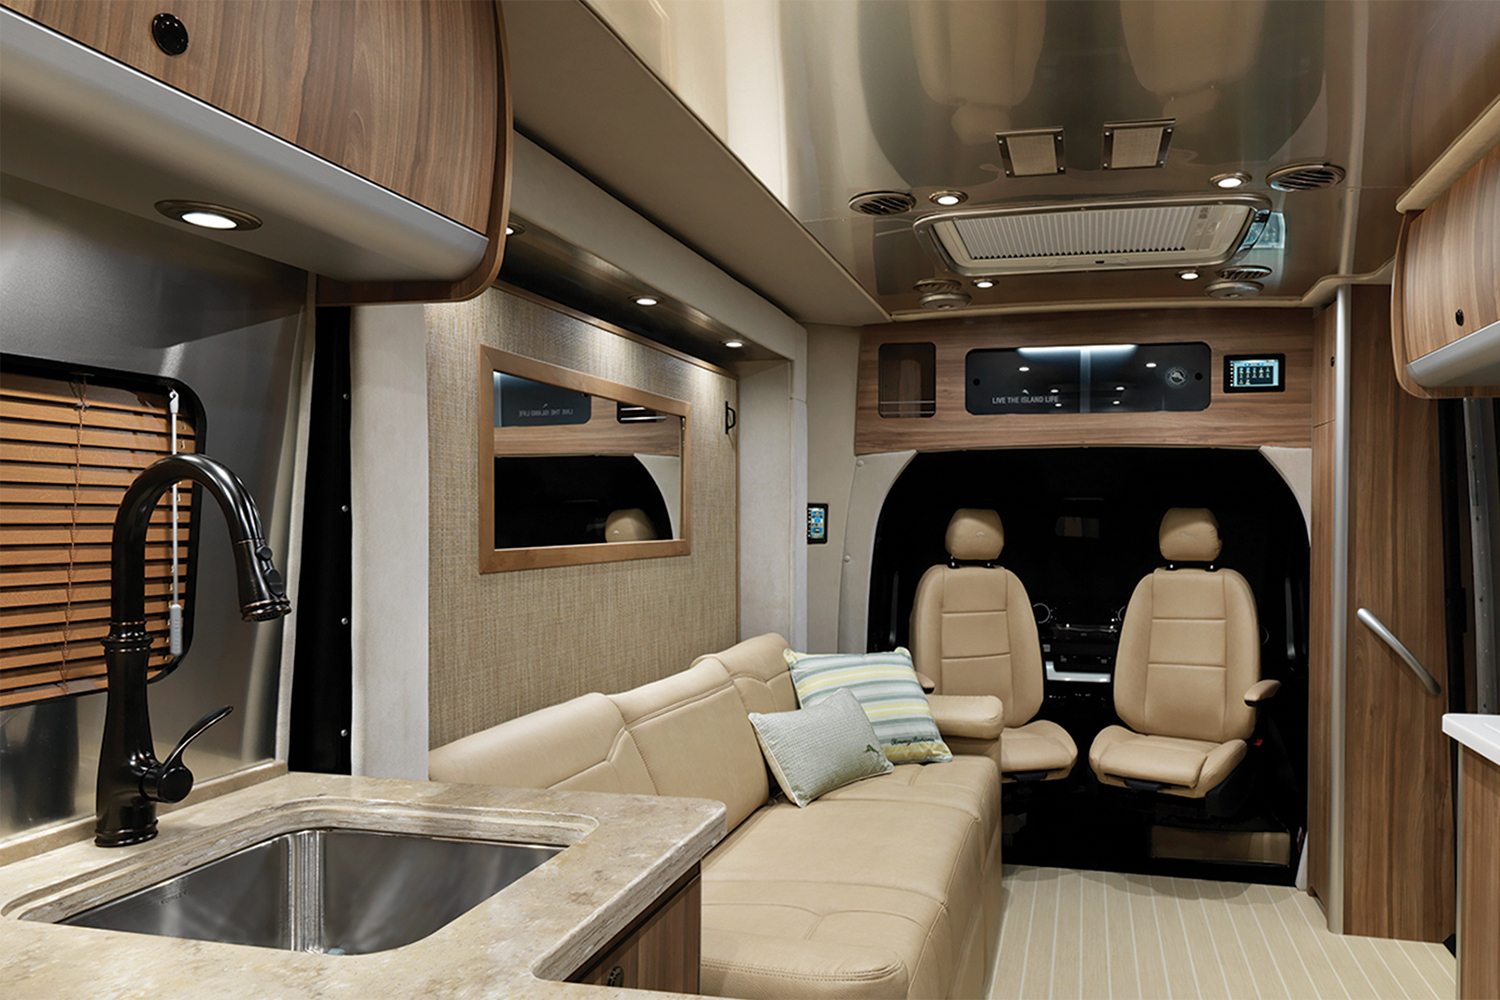 The Airstream Atlas motorhome with a Tommy Bahama interior package